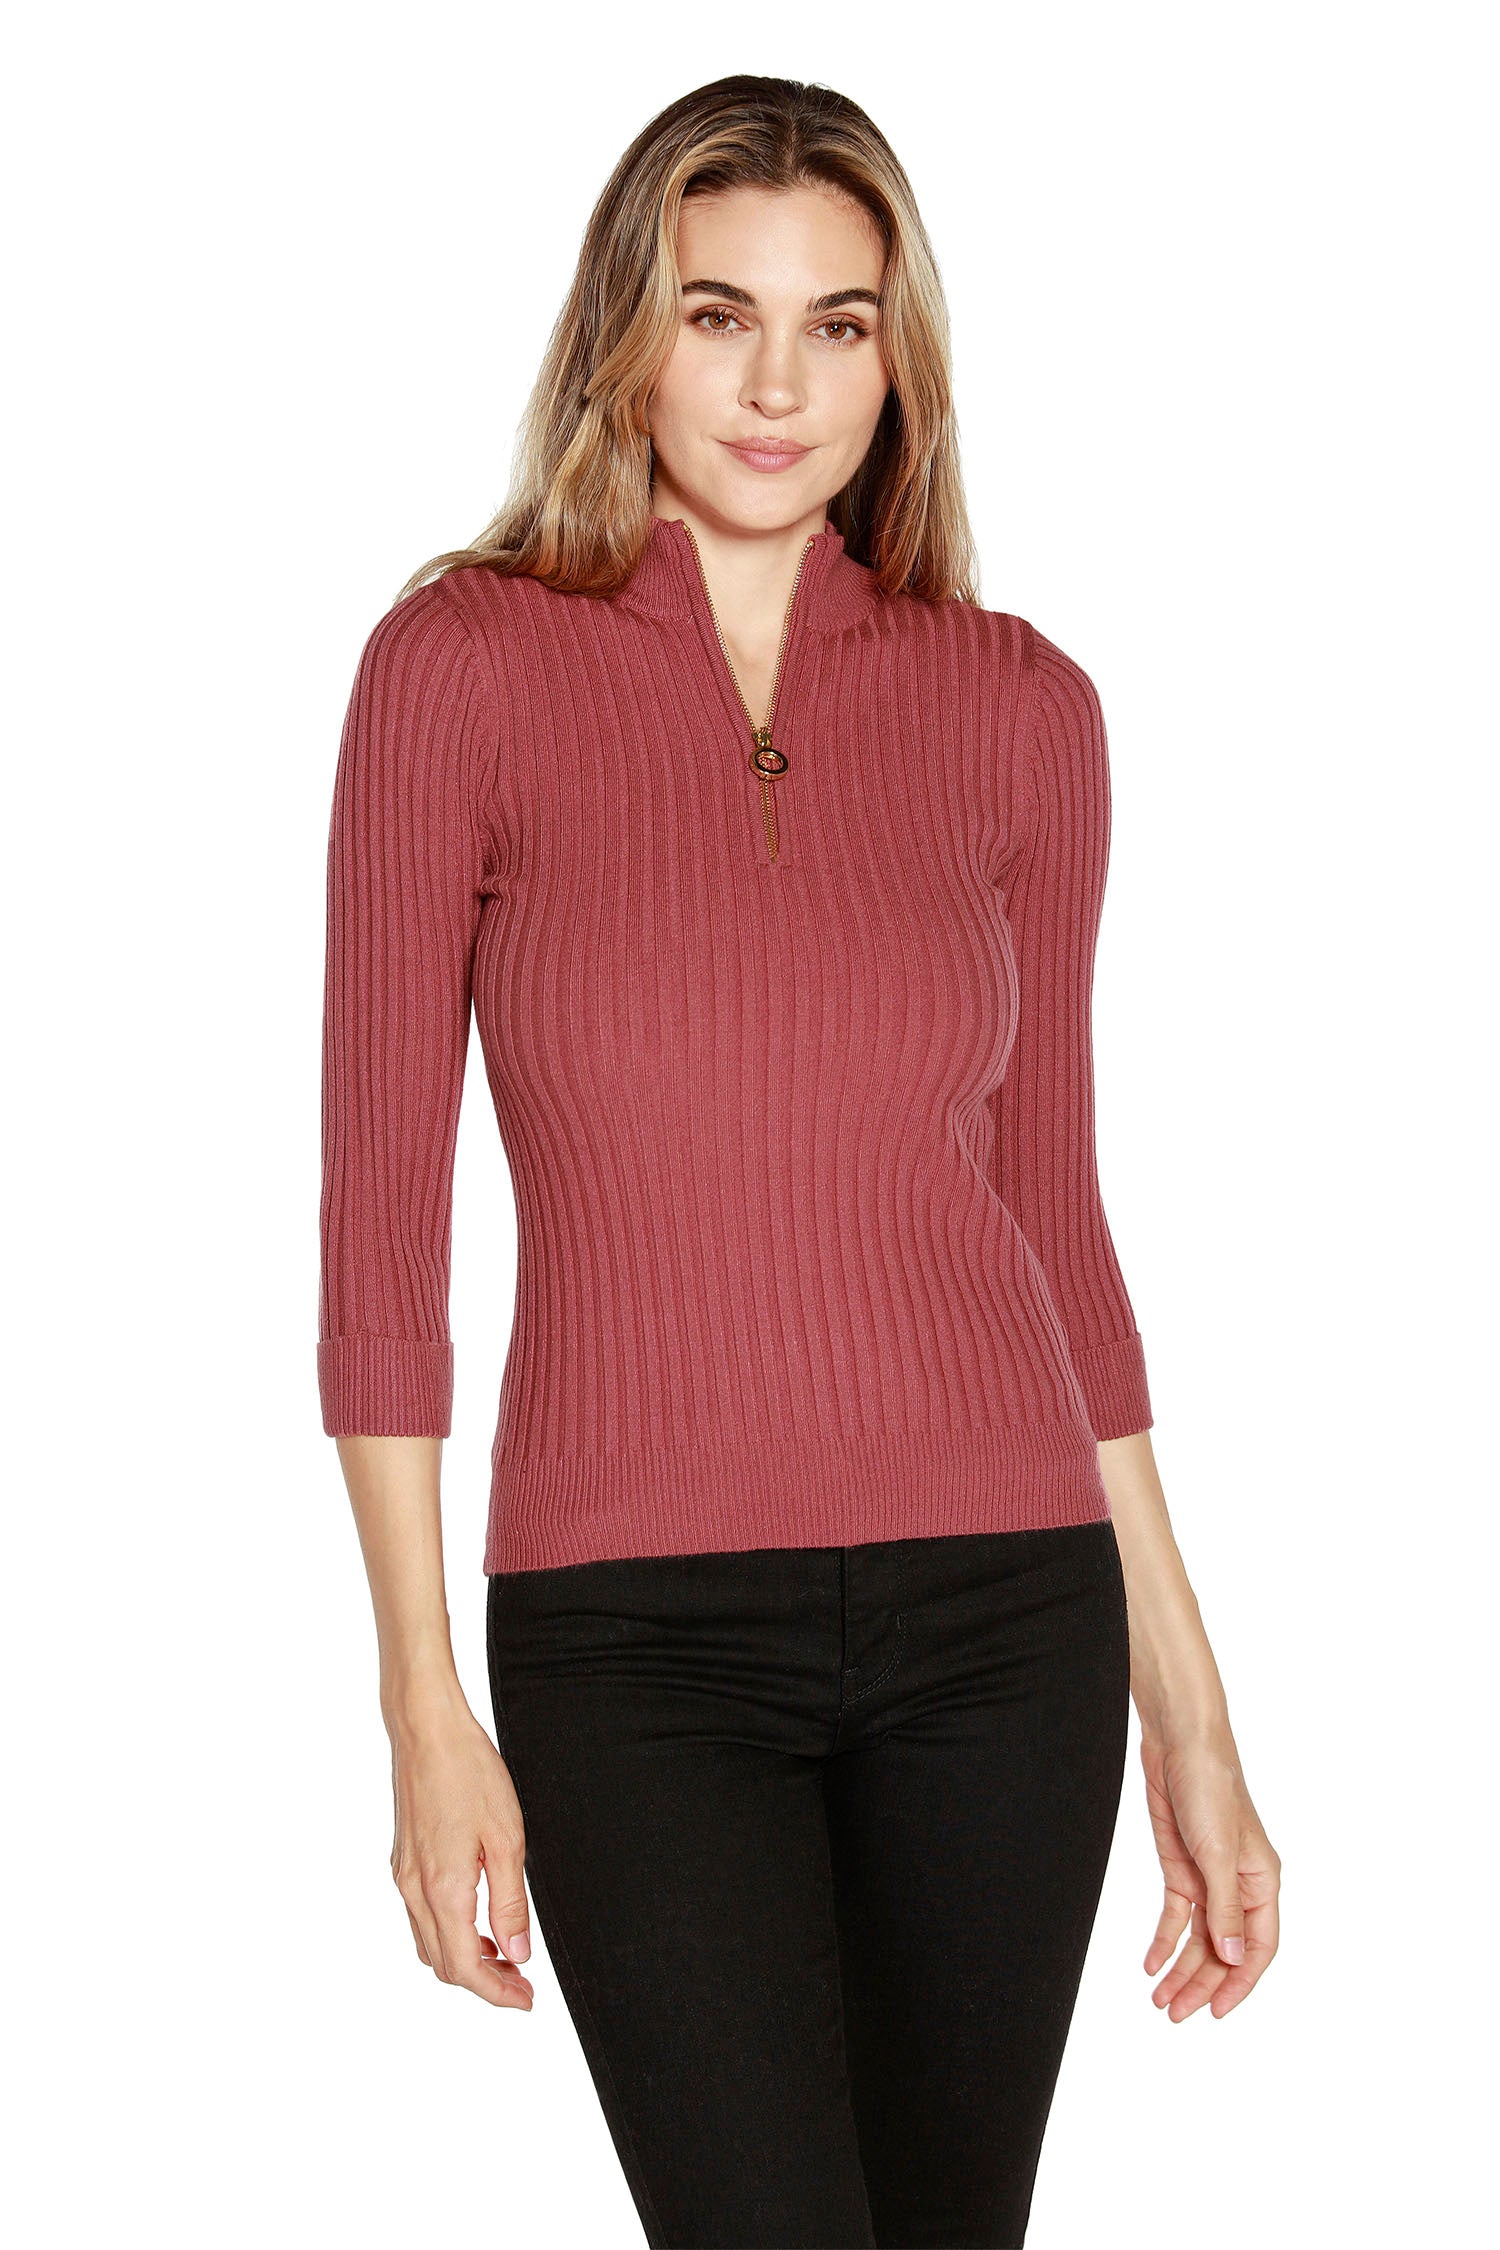 Women's Quarter Length Zipper Polo with 3/4 Sleeves and Mock Neck Collar